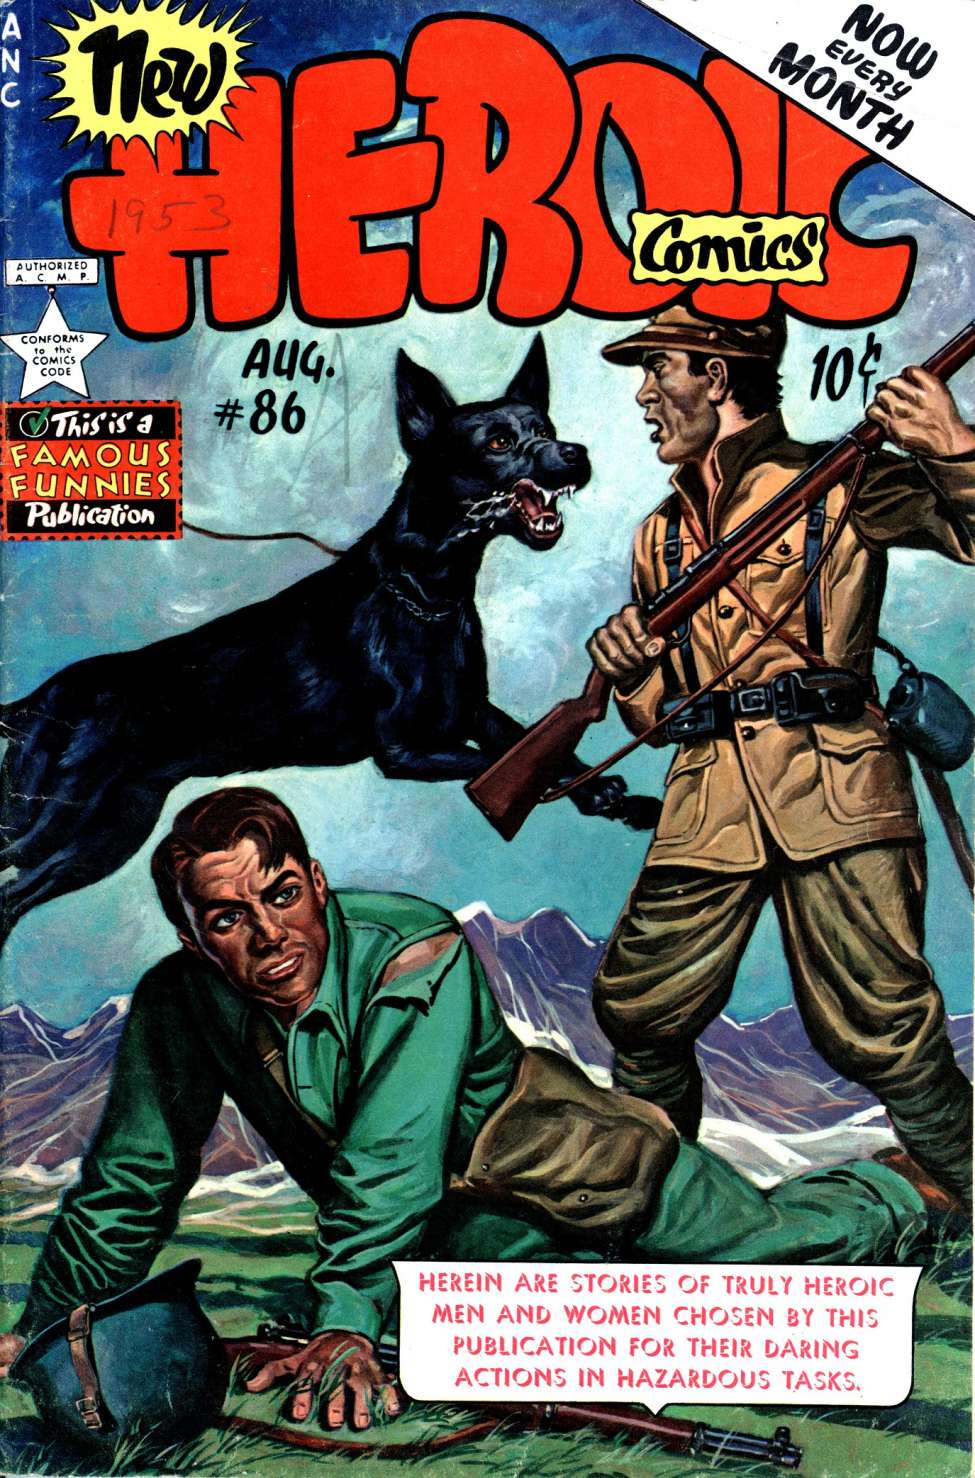 Comic Book Cover For New Heroic Comics 86 (alt) - Version 2